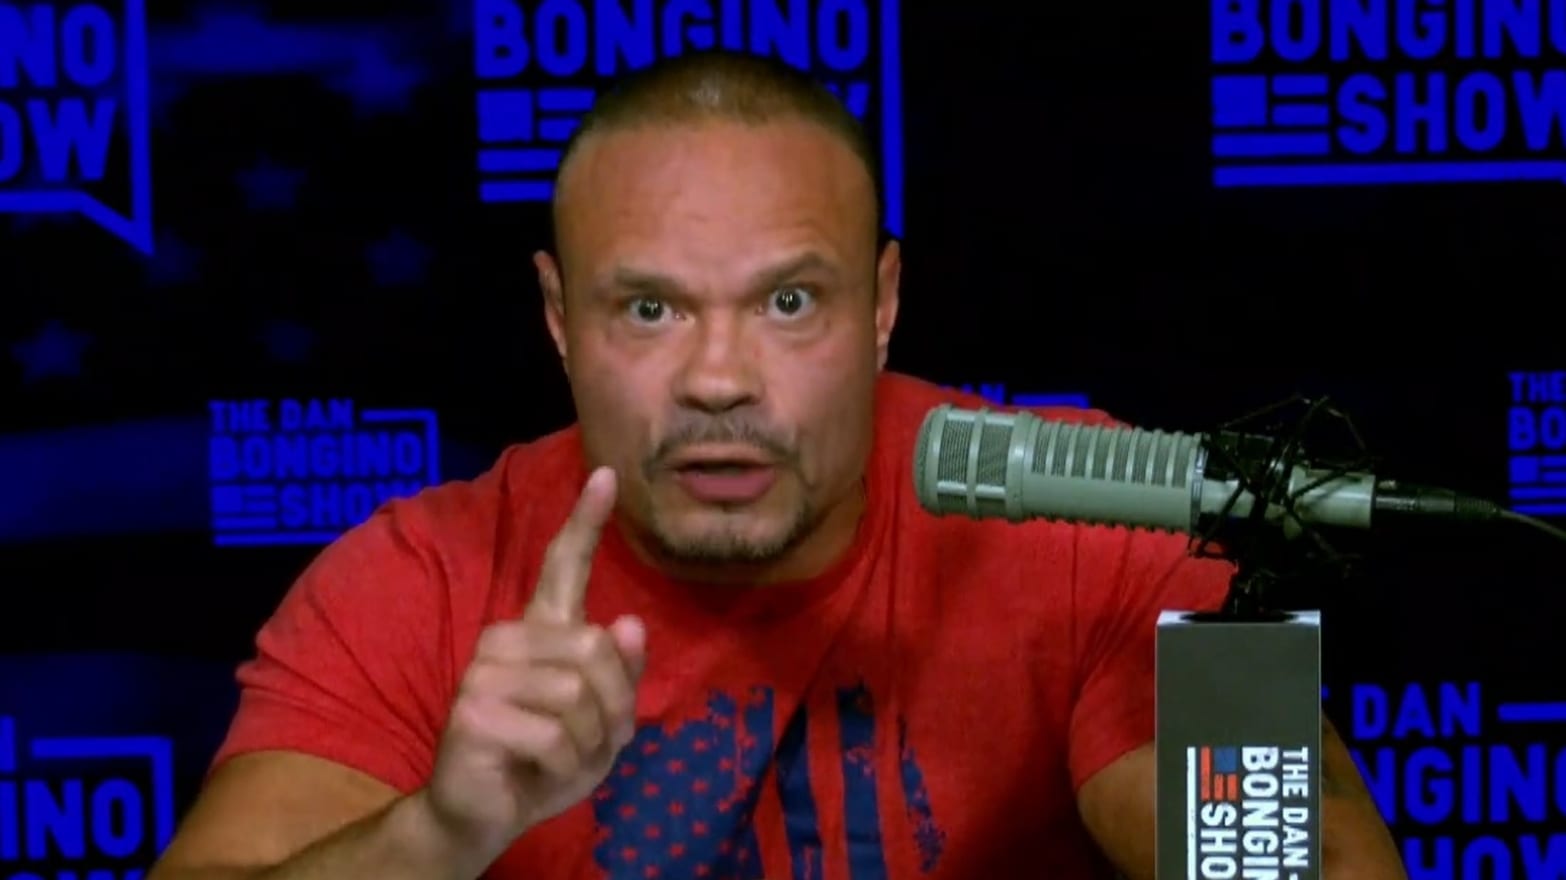 Fox Contributor Dan Bongino Wont Comply With Mask Orders While Fox News Publicly Urges Mask-Wearing